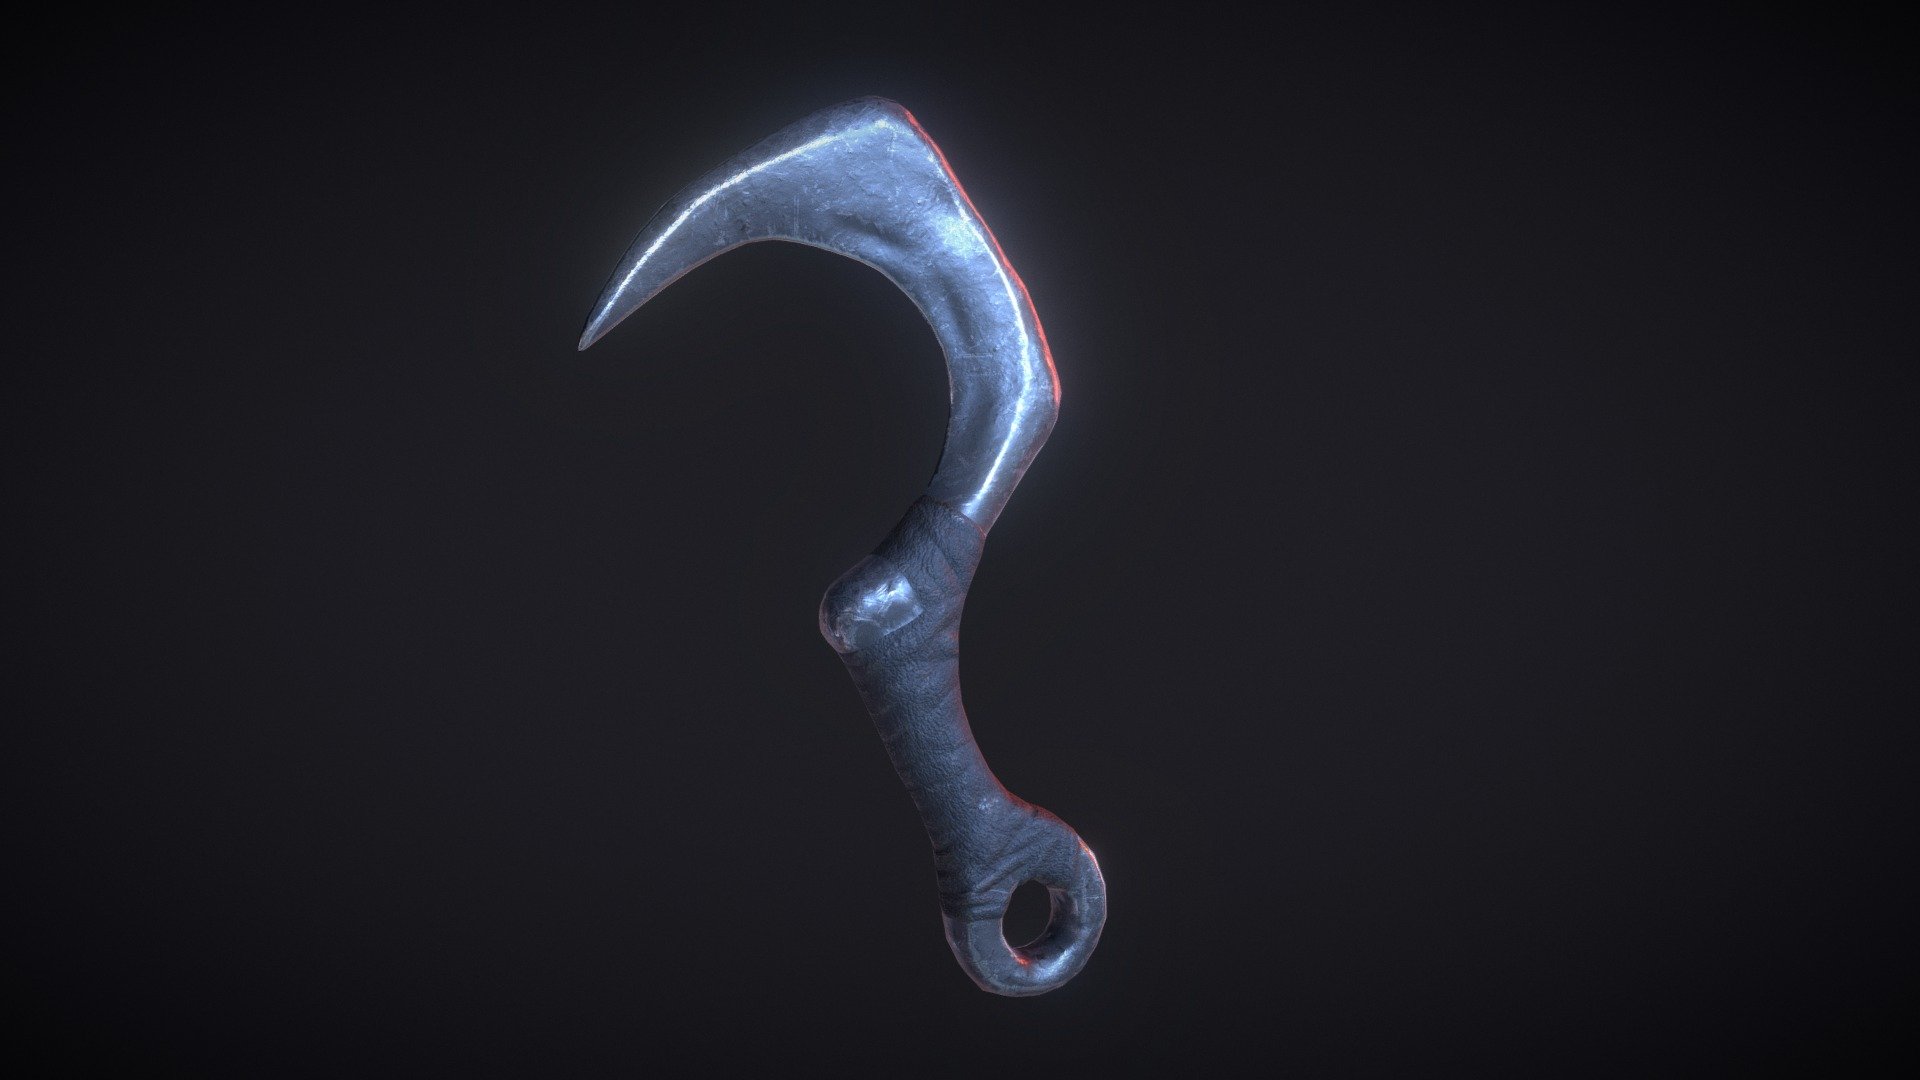 Practice game asset, a heavy iron sickle.
Max/Mudbox/Substance Painter - Heavy Hand Scythe - 3D model by Nicksketch 3d model